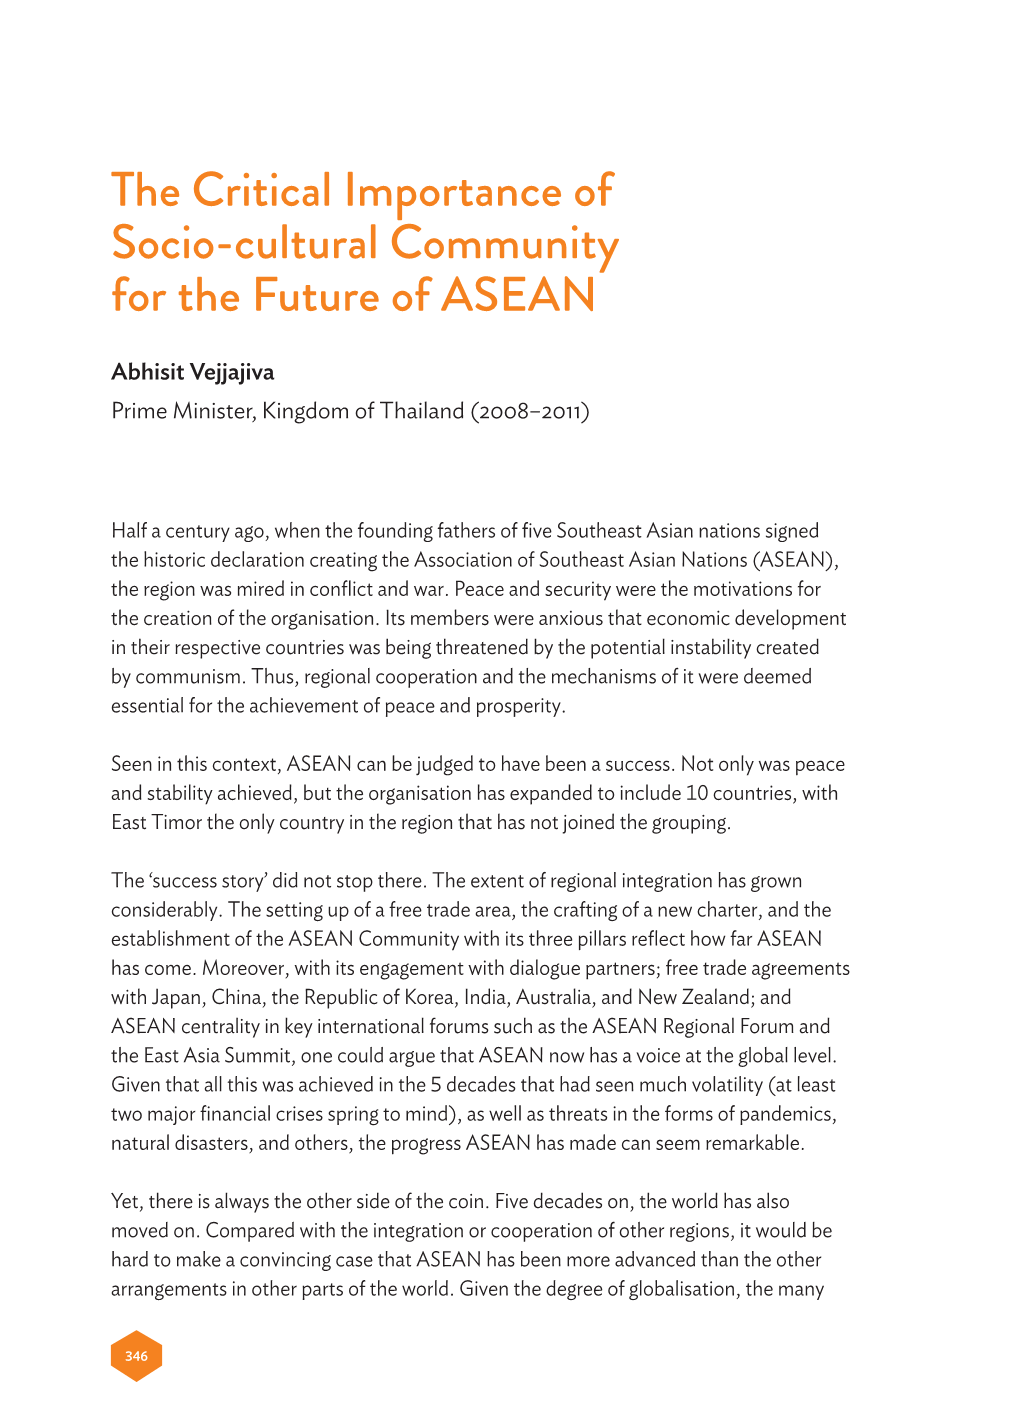 The Critical Importance of Socio-Cultural Community for the Future of ASEAN